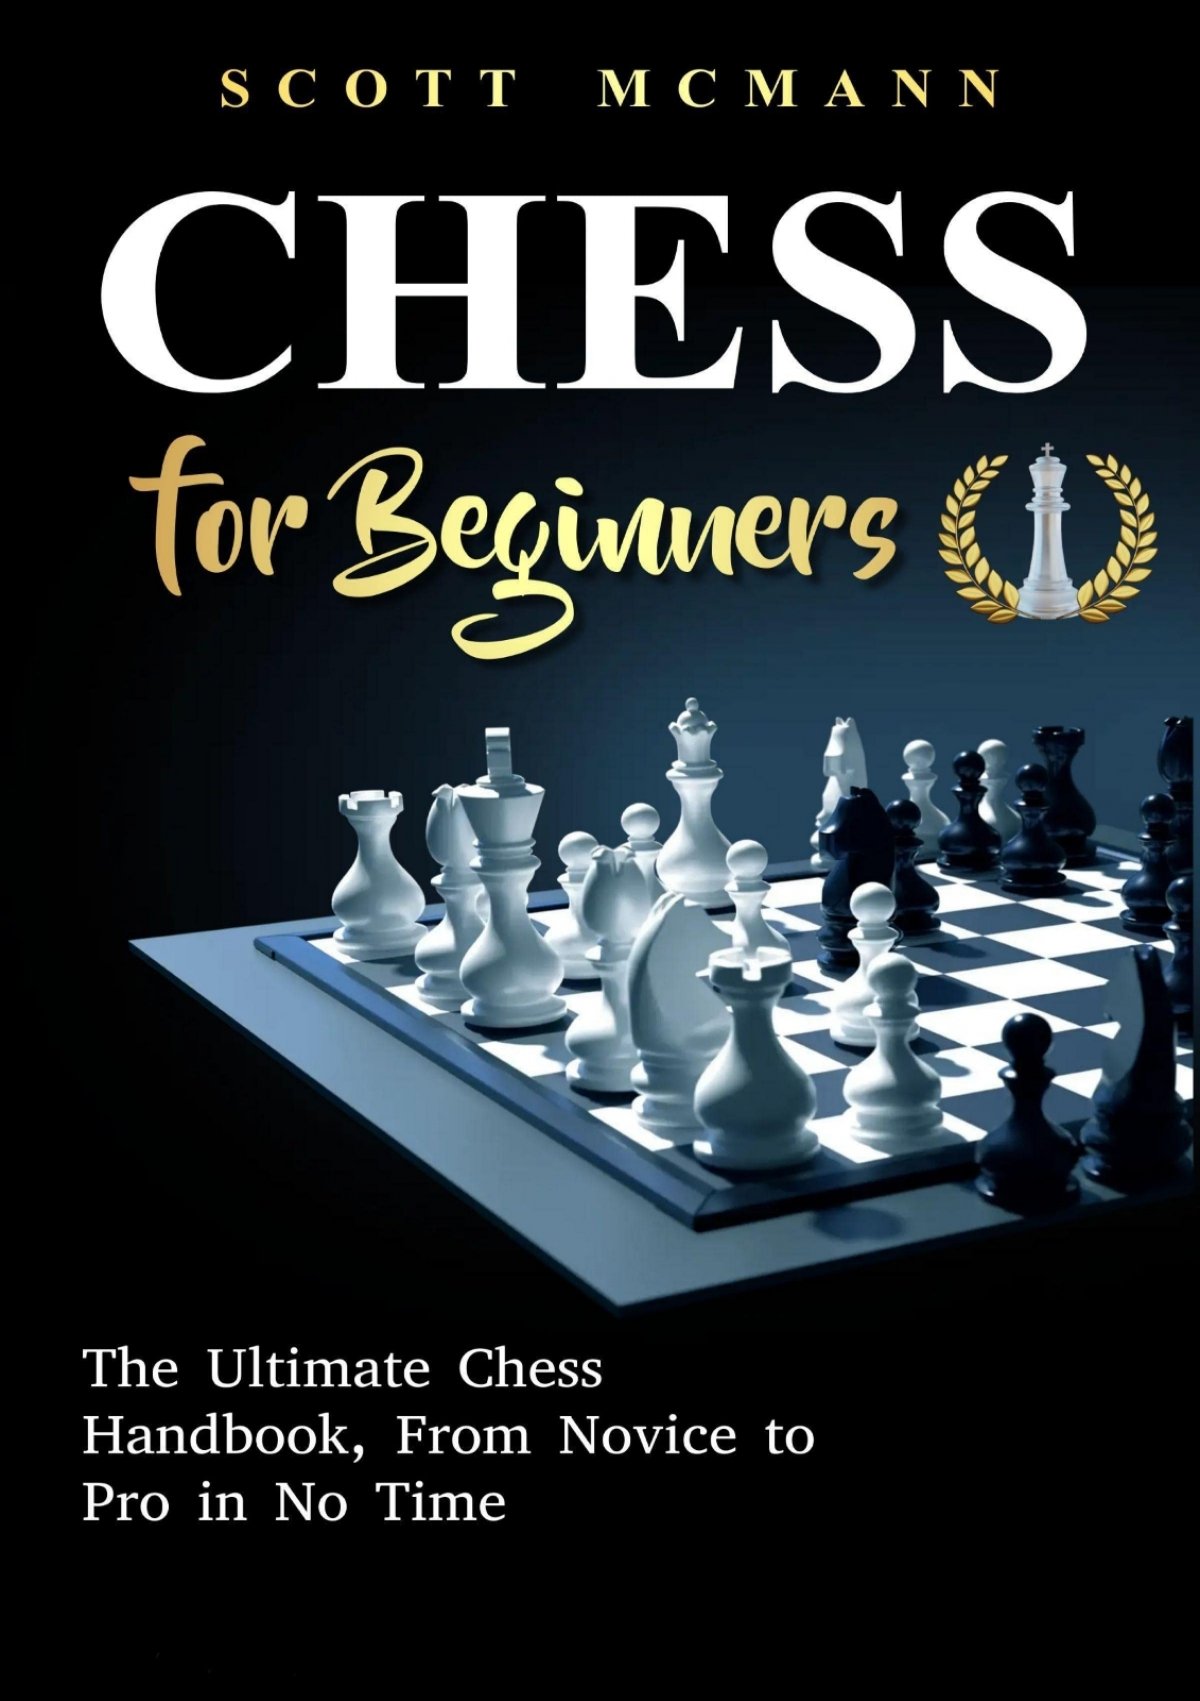 Stream download(⚡PDF⚡)* Chess: The Complete Guide to Chess